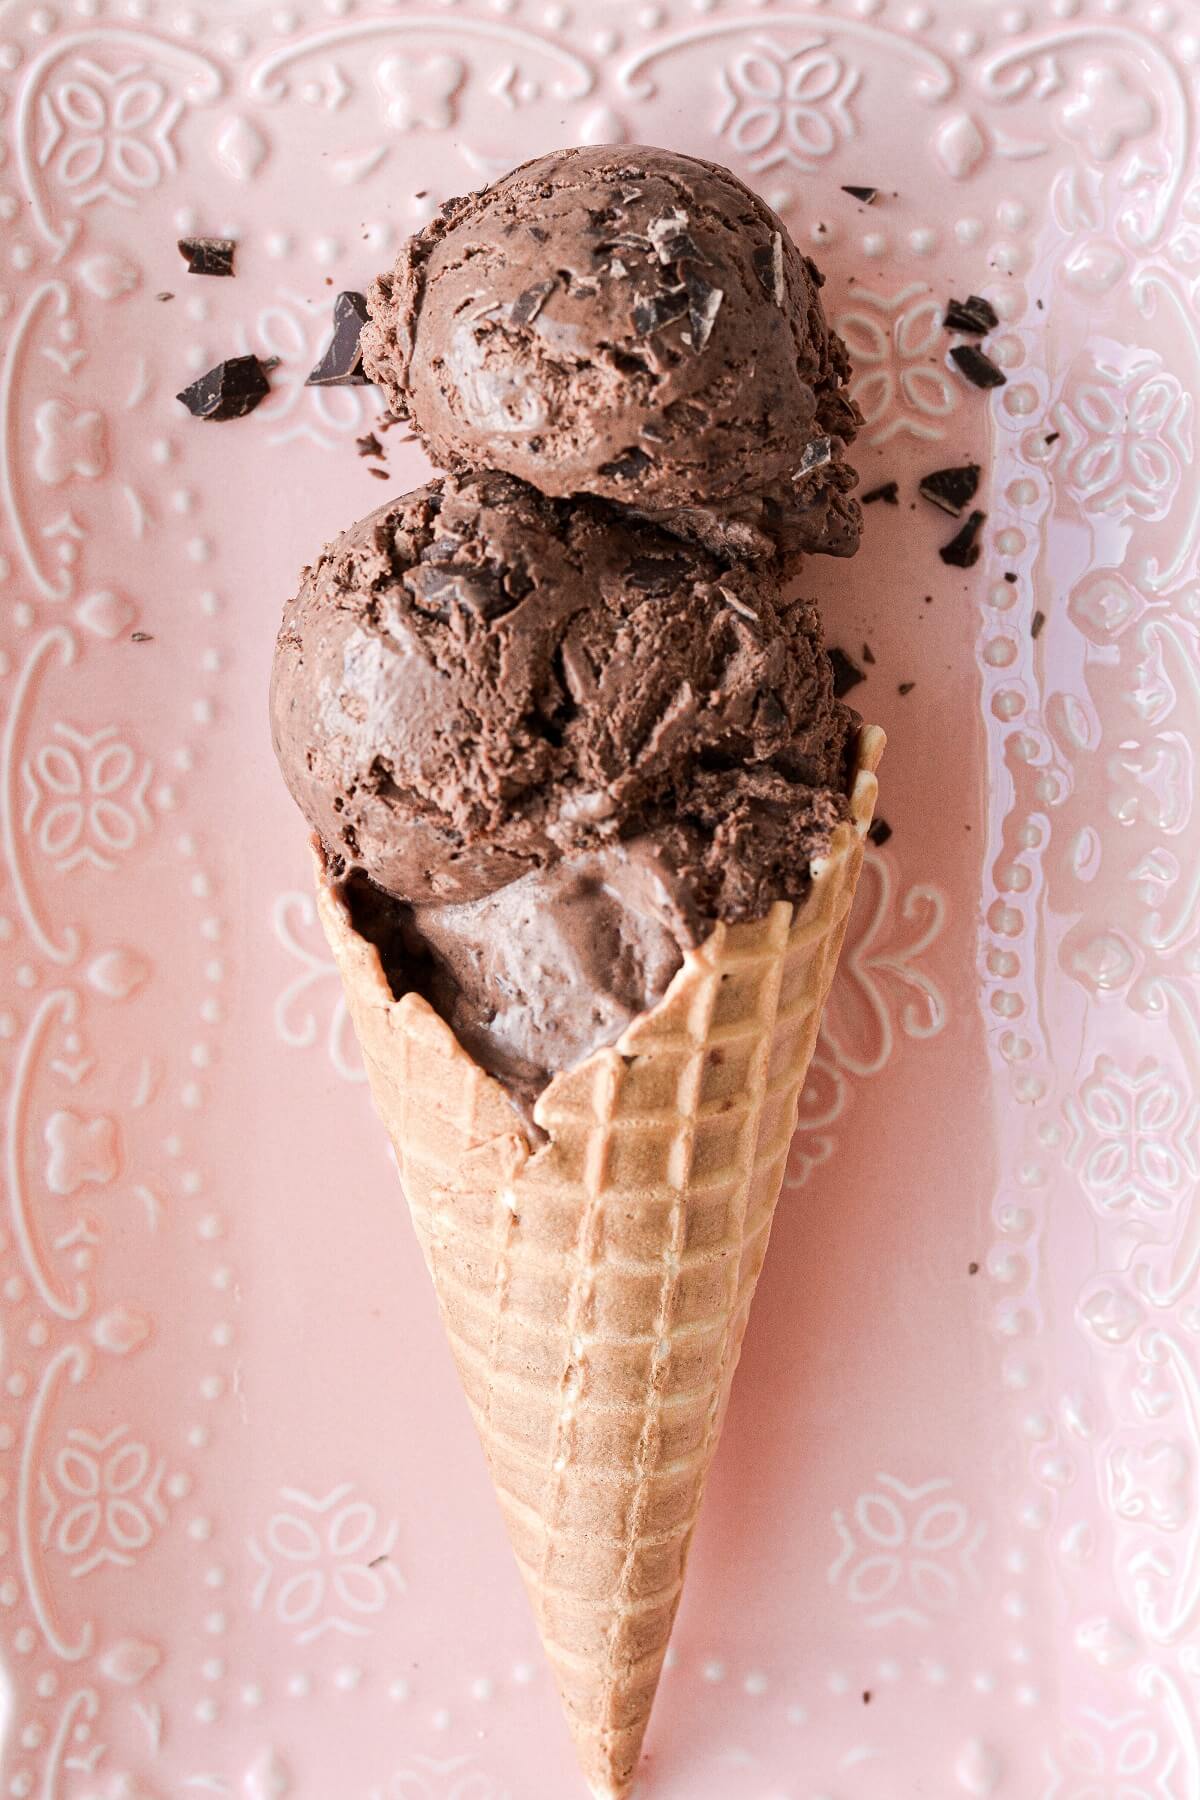 Scoops of no churn triple chocolate ice cream in a waffle cone.